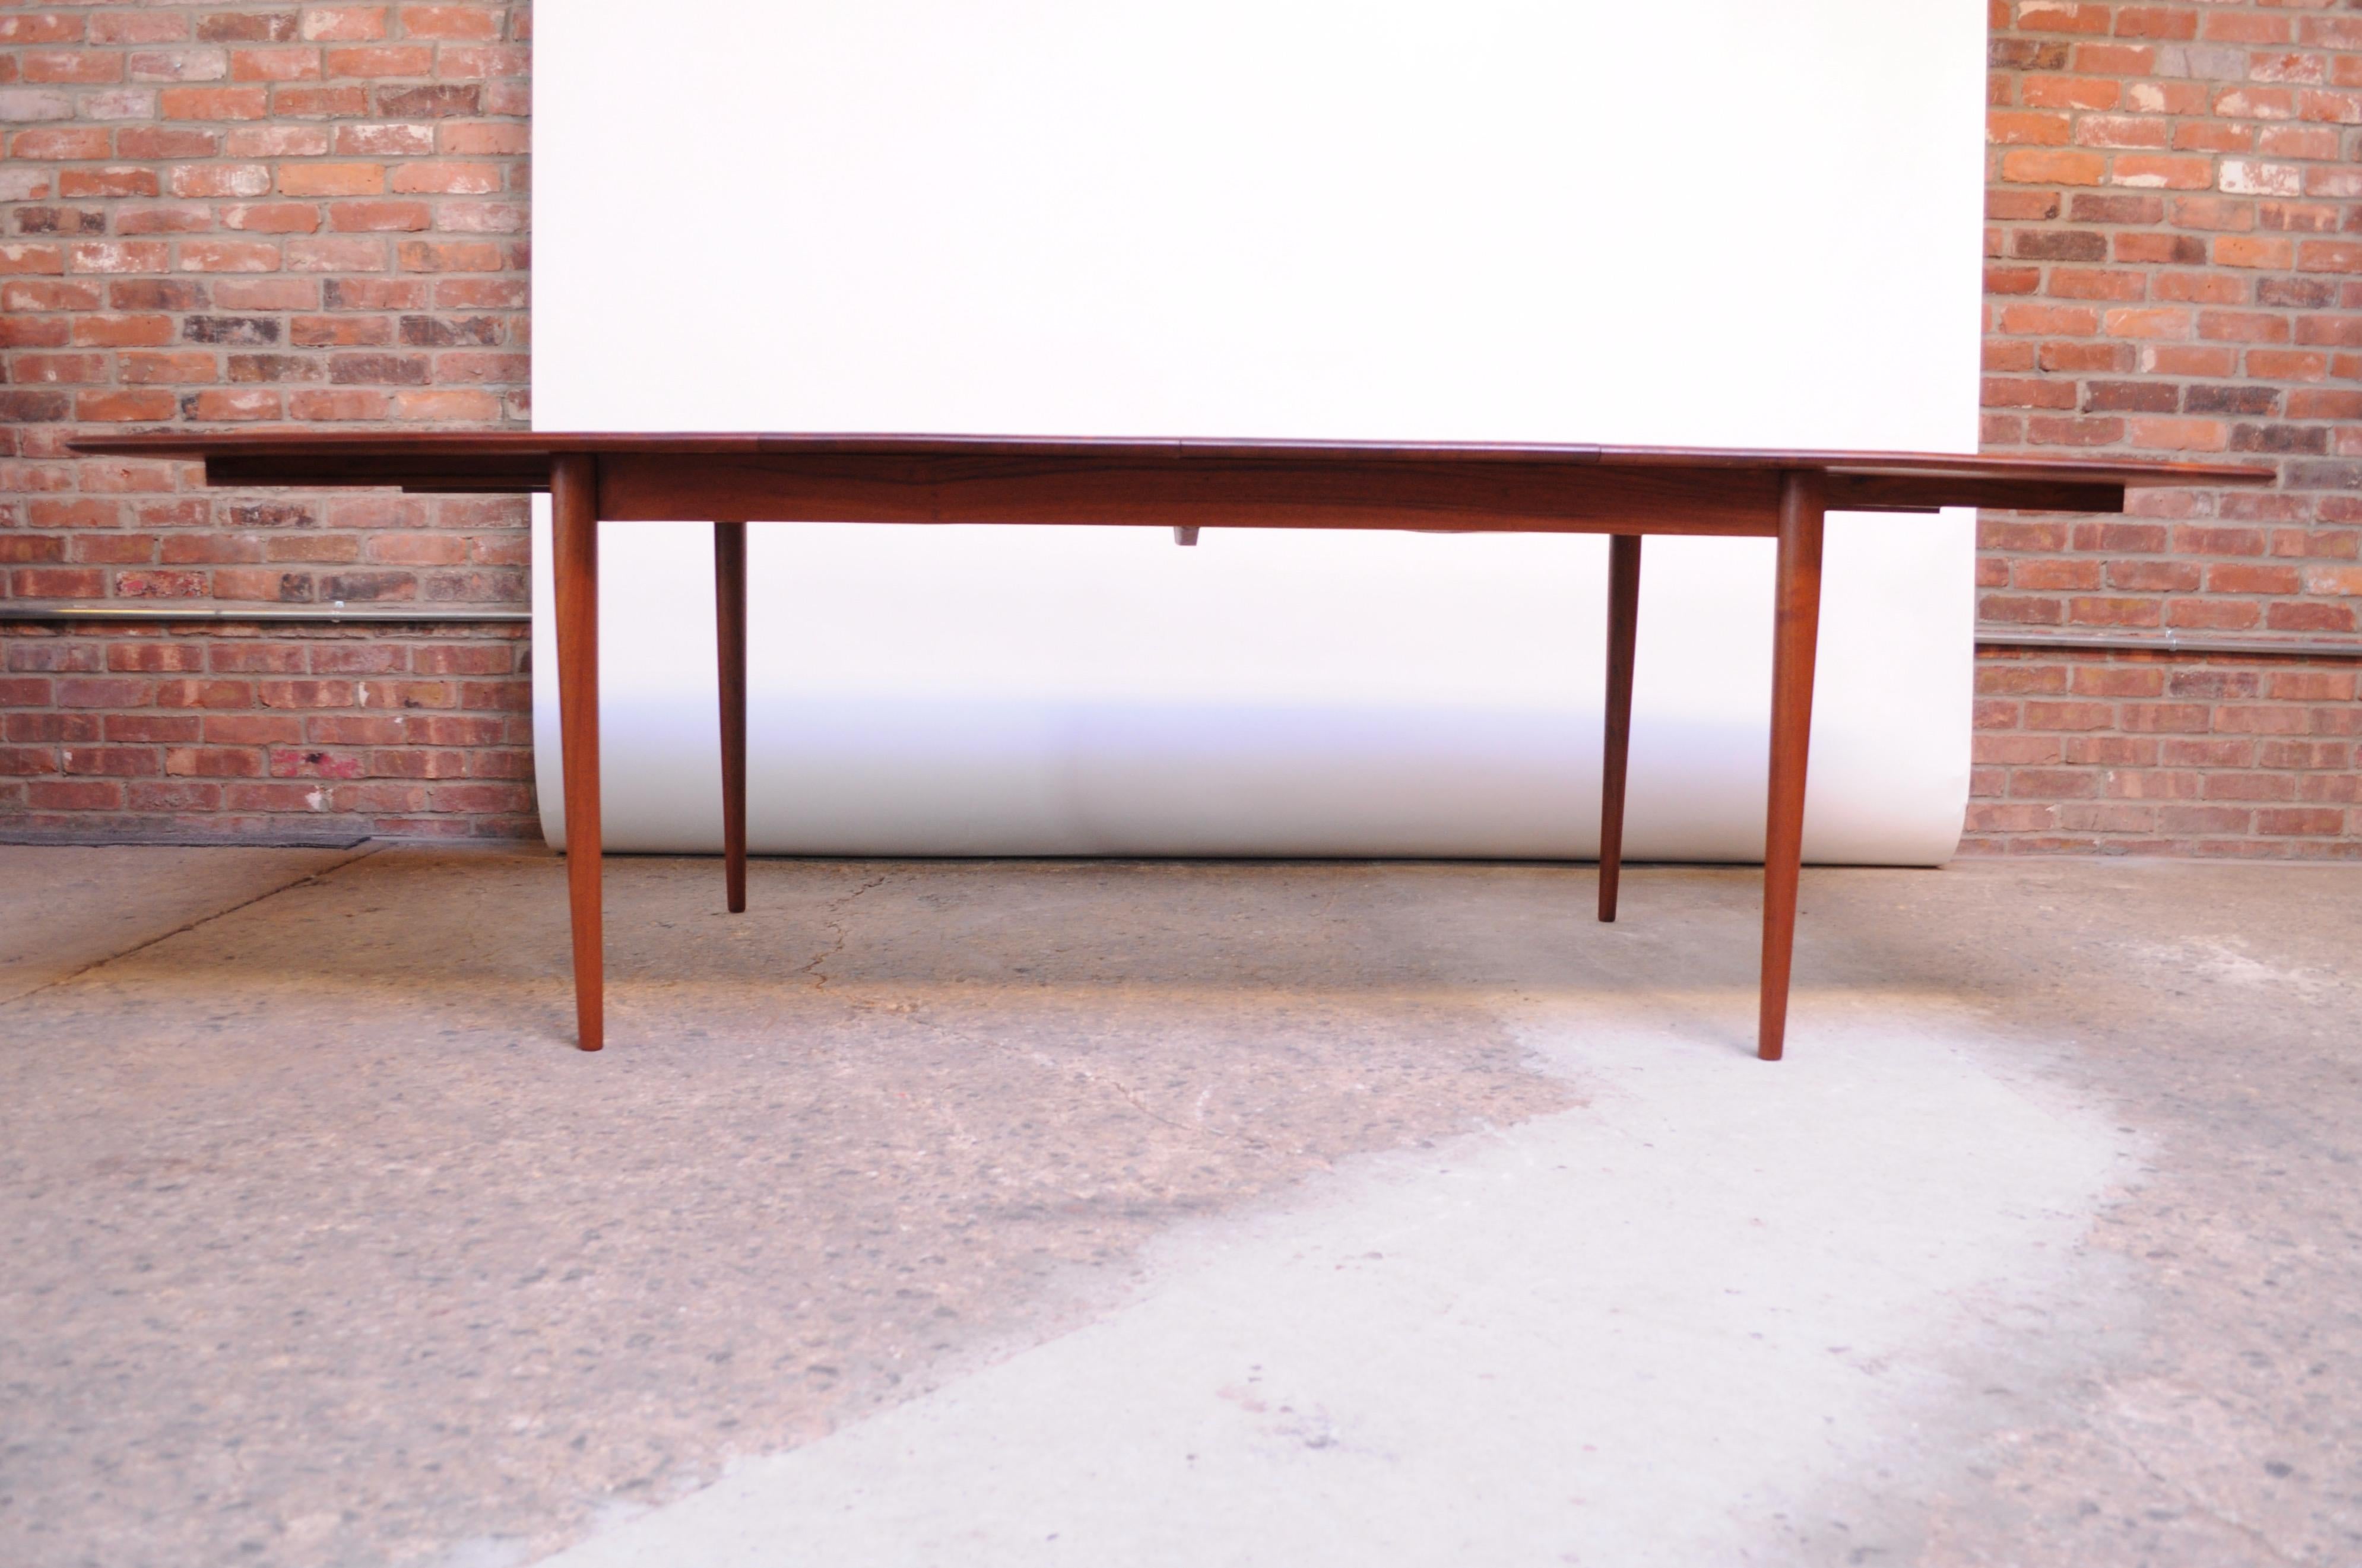 Solid teak extendable dining table by Johannes Aasbjerg for Excellent Furniture Company (circa 1963 Denmark).
Unparalleled quality, composed of solid teak planks with vivid grain and rich color. Includes two additional 18.25